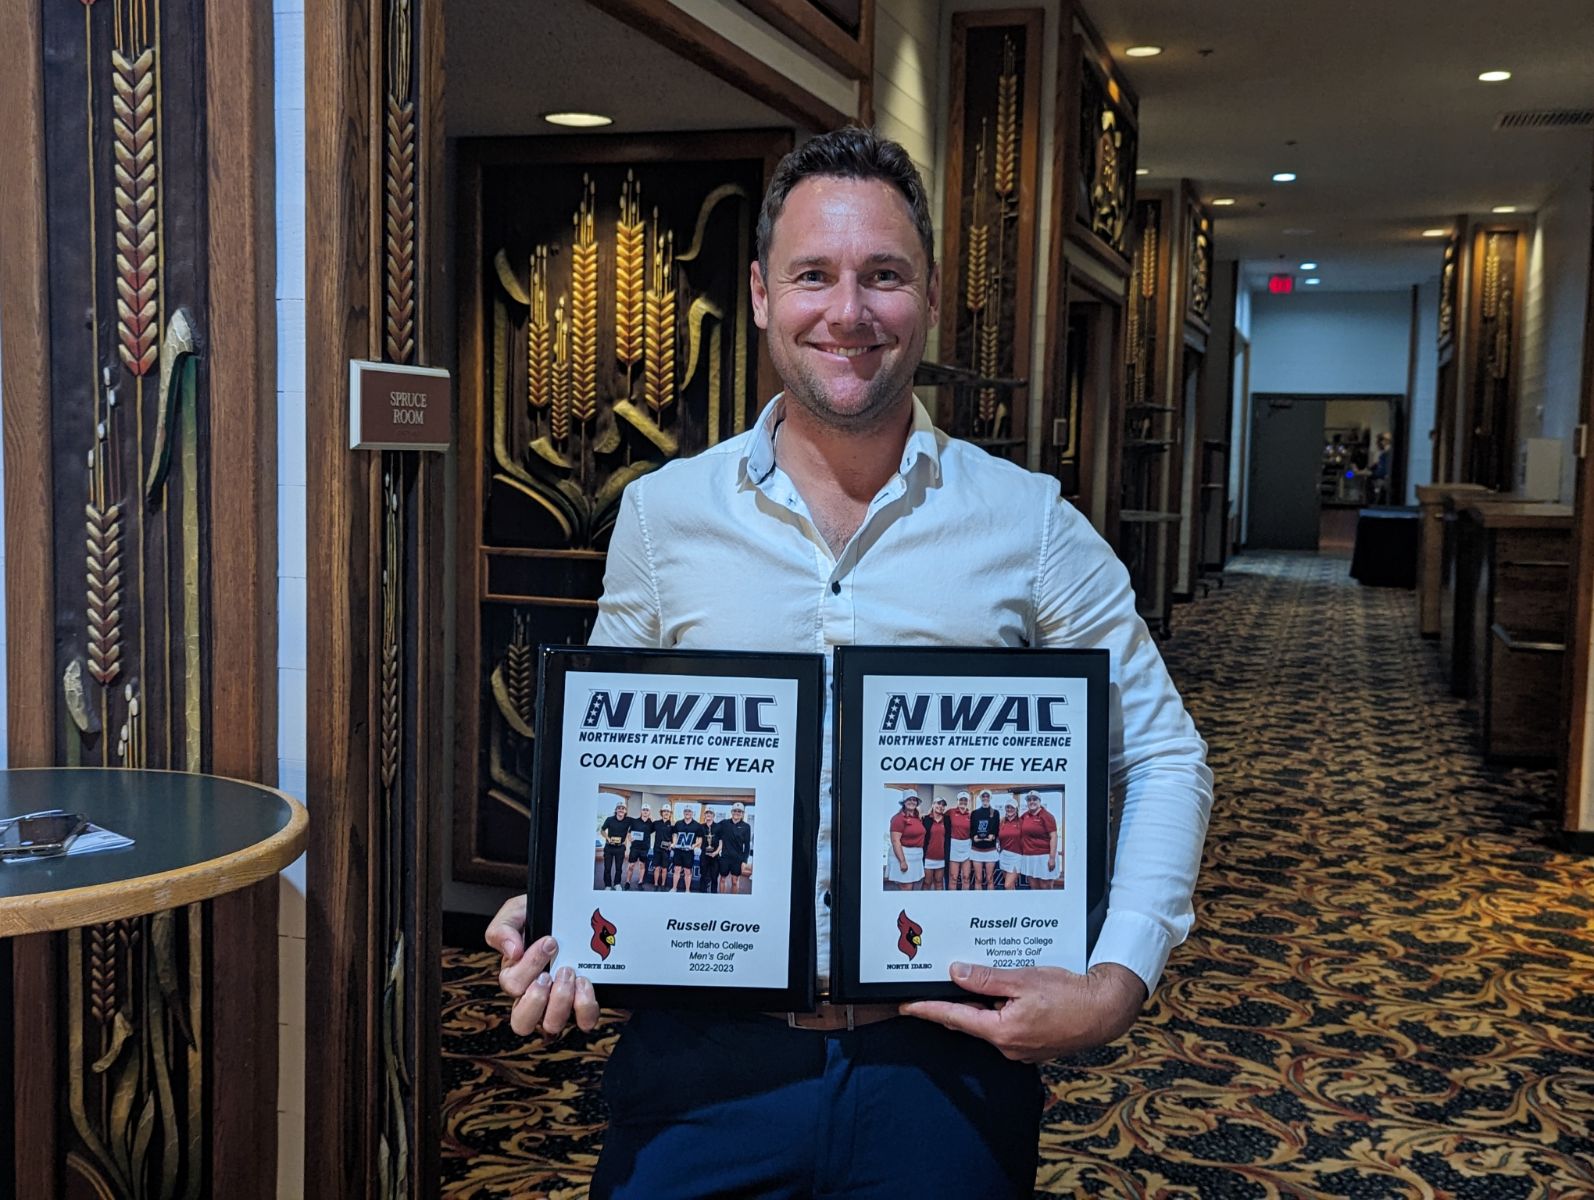 Coach Russell Grove named NWAC Coach of the Year for men's and women's golf